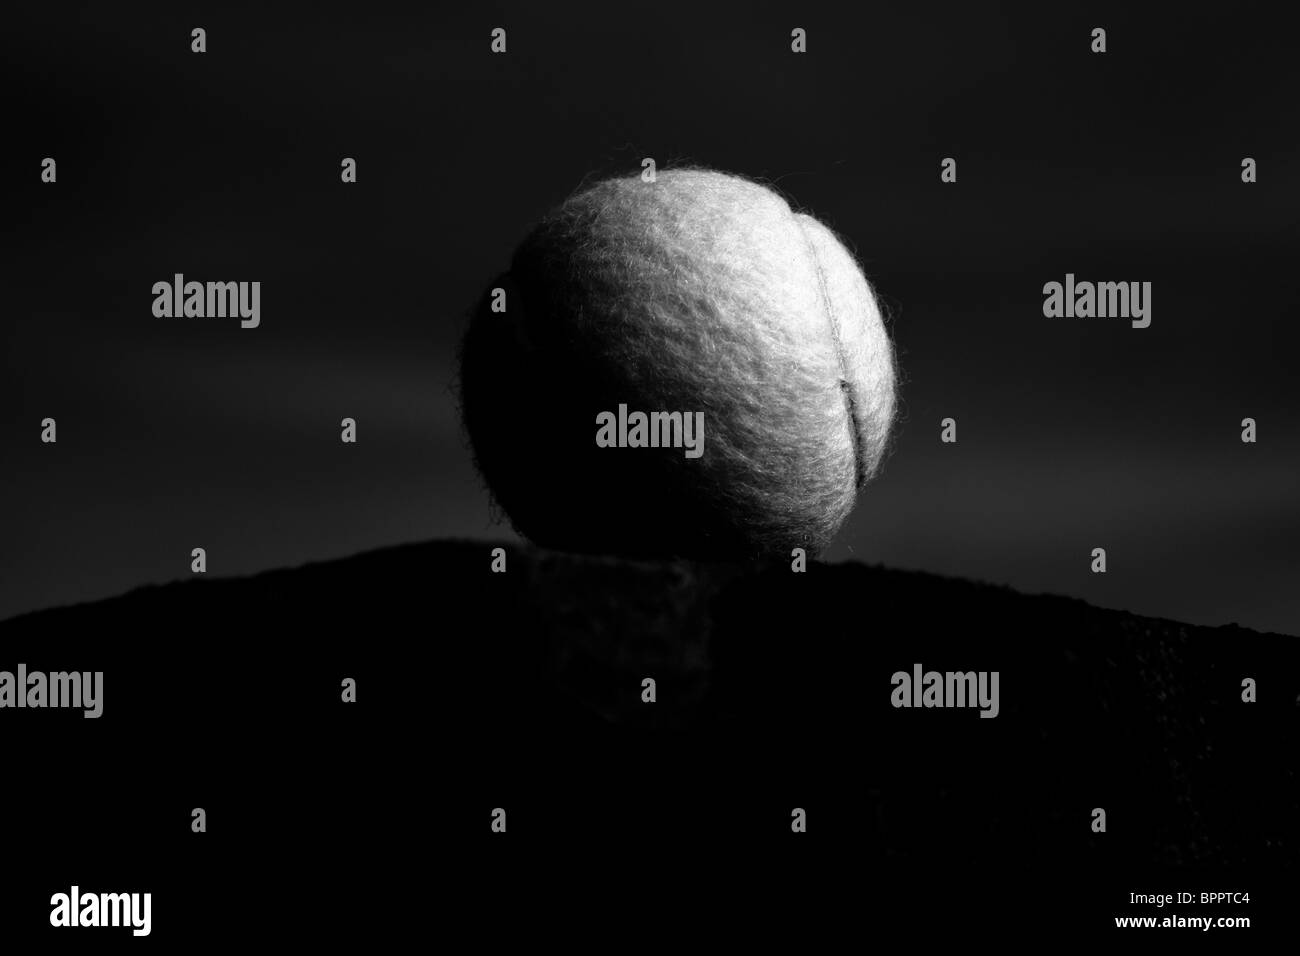 A solitary yet majestic tennis ball sits atop a platform lit from one side, as if by moonlight. Stock Photo